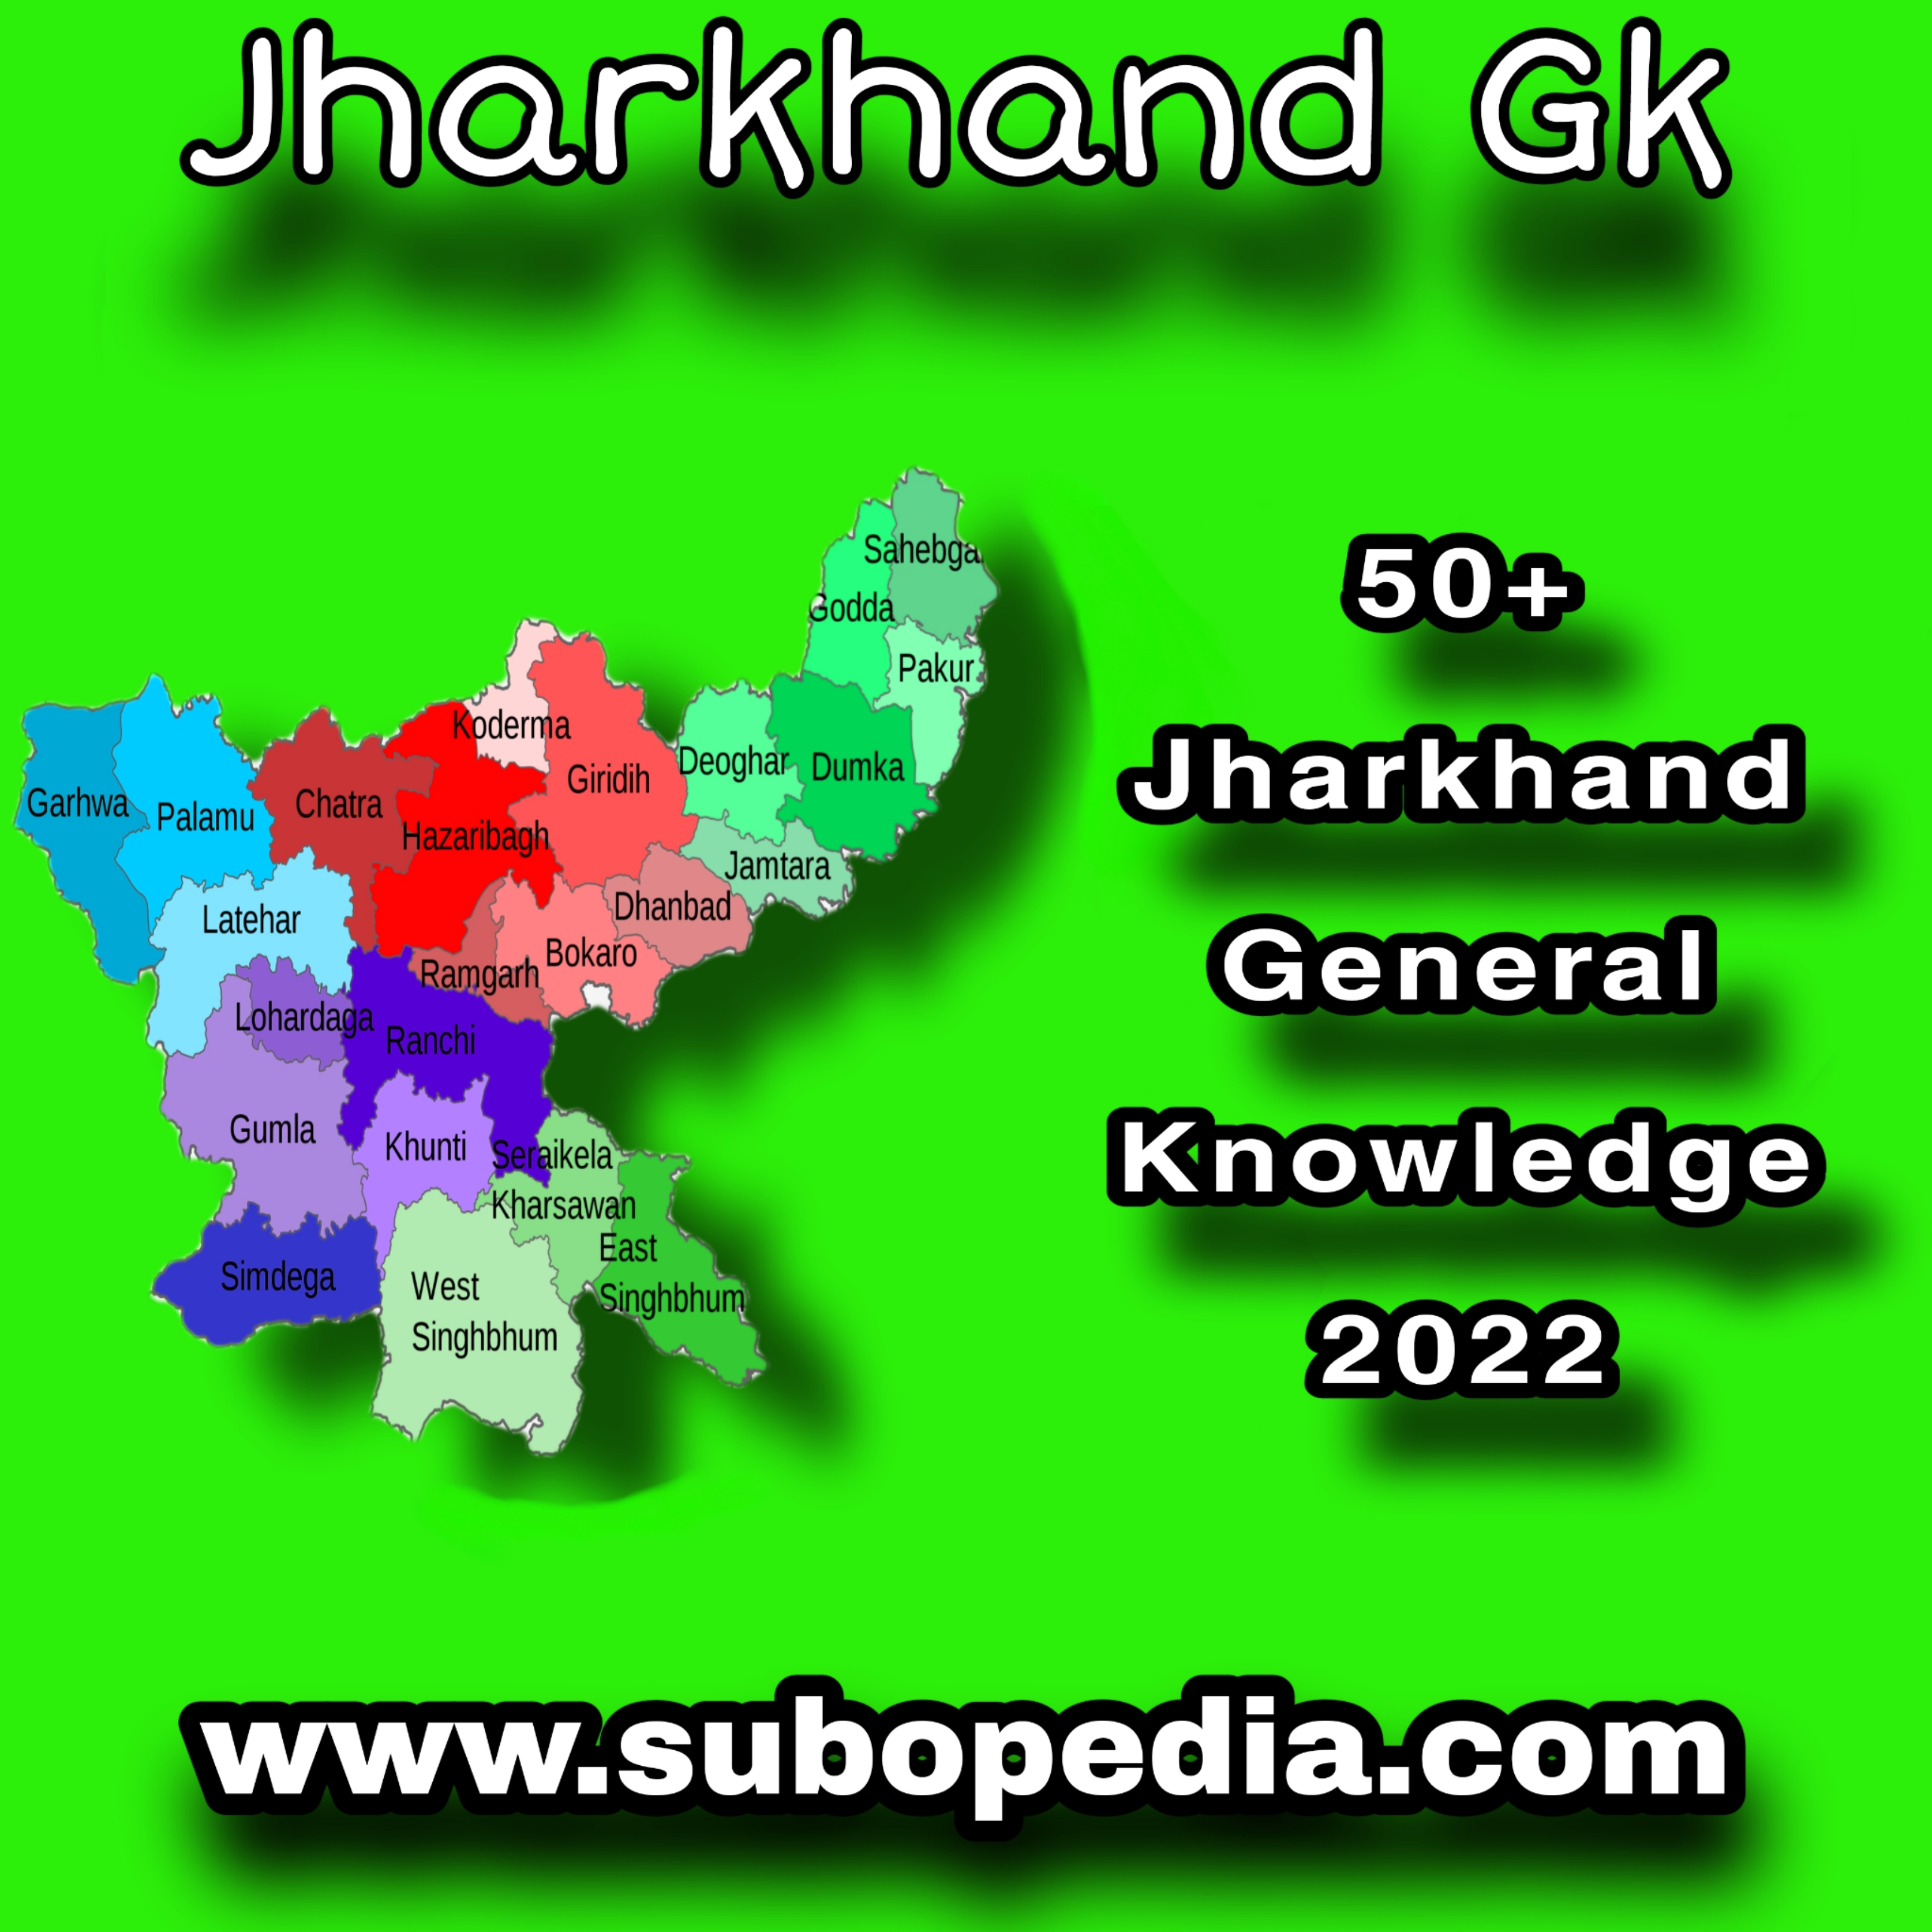 50+ Jharkhand General Knowledge 2022